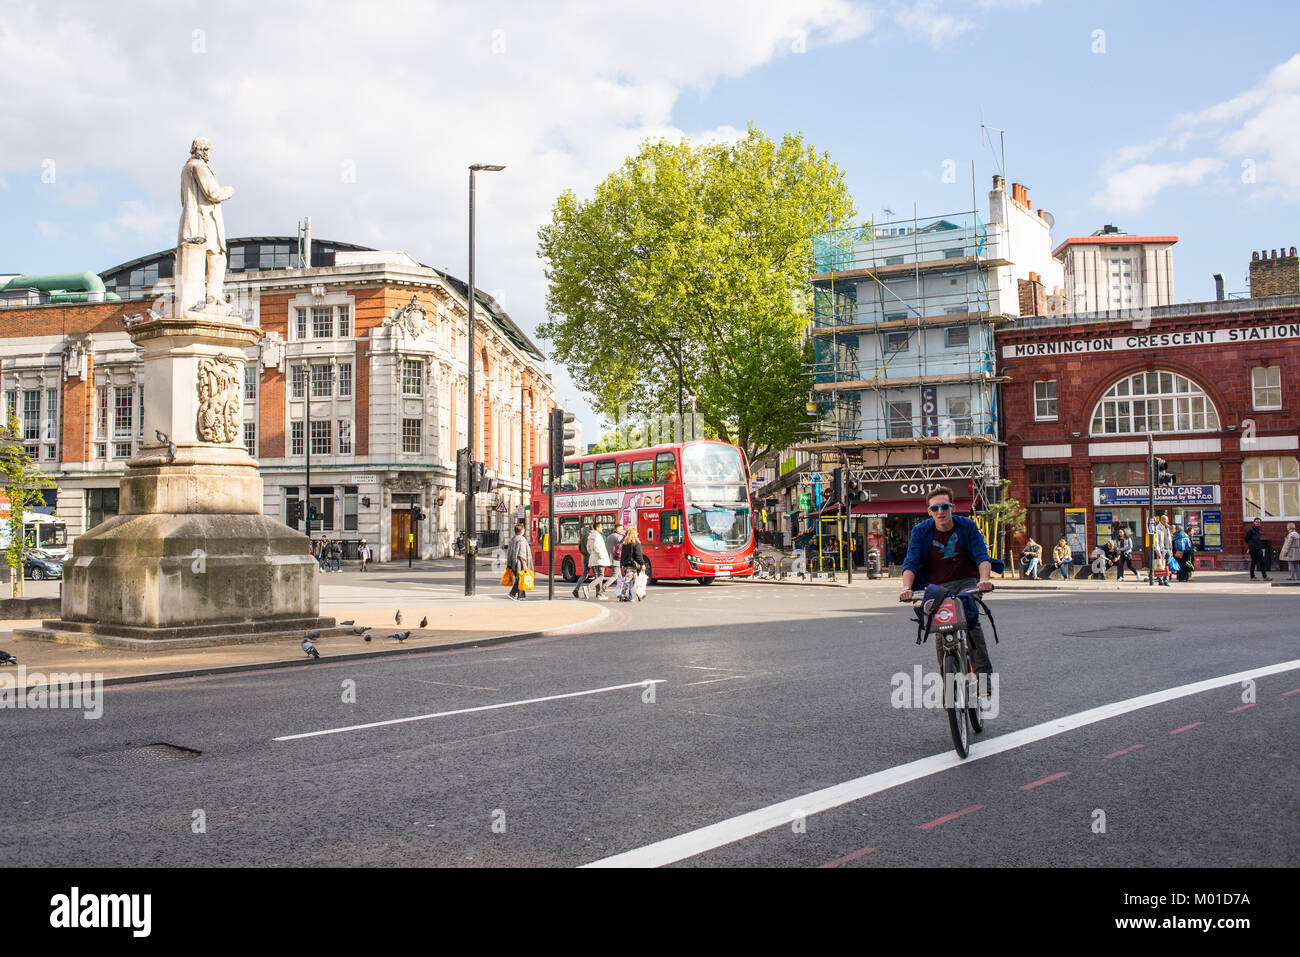 London, UK - April 2017. Cyclist on Santander bike and people walking plus red bus in the background in front of Mornington Crescent Underground Stati Stock Photo